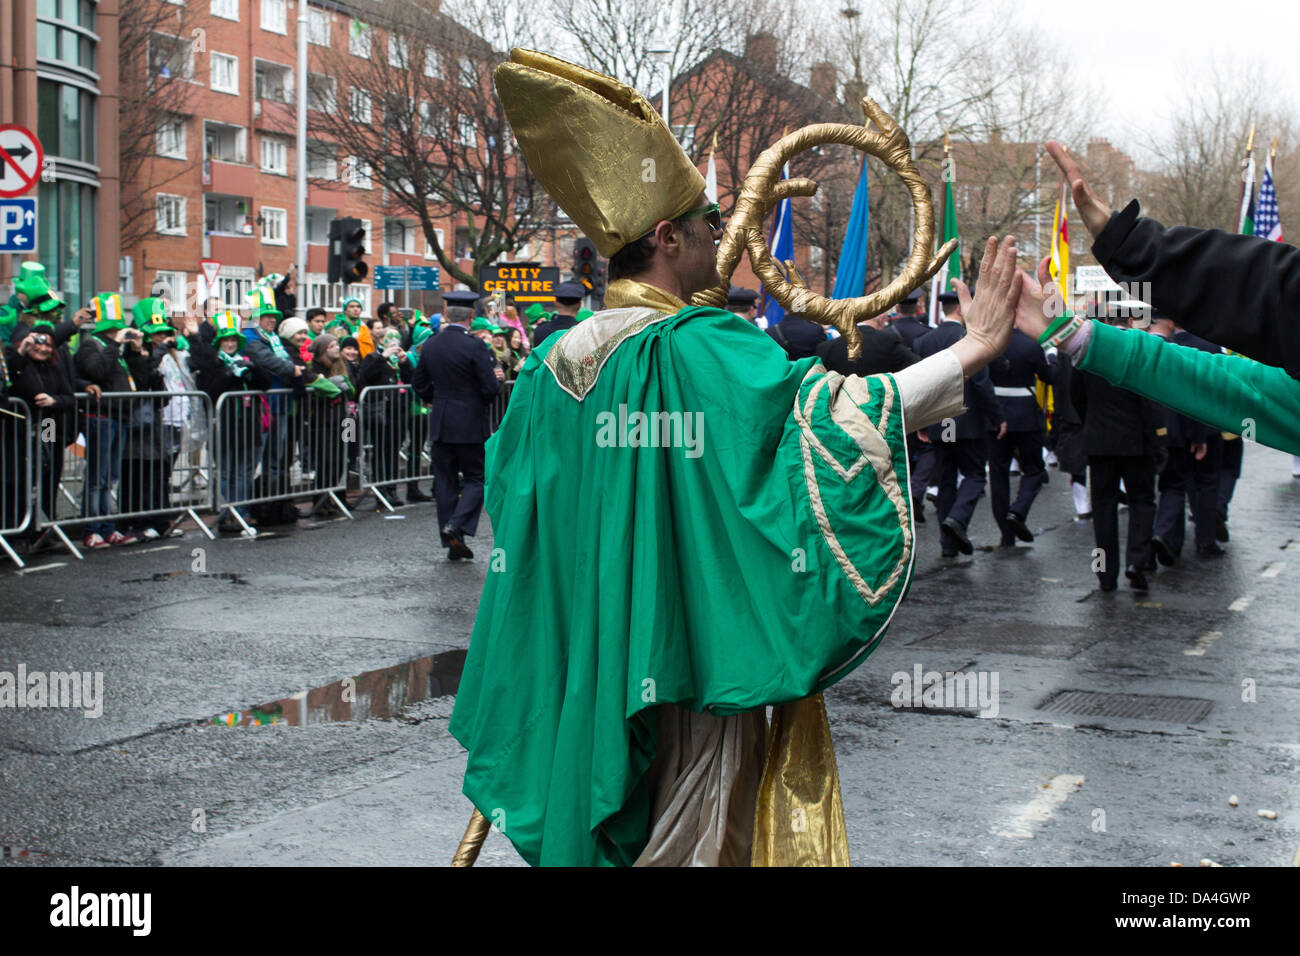 A man wearing St. Patrick's outfit gives a 'high-five' to a spectator, Dublin, Ireland, St. Patrick's Parade, 2013. Stock Photo